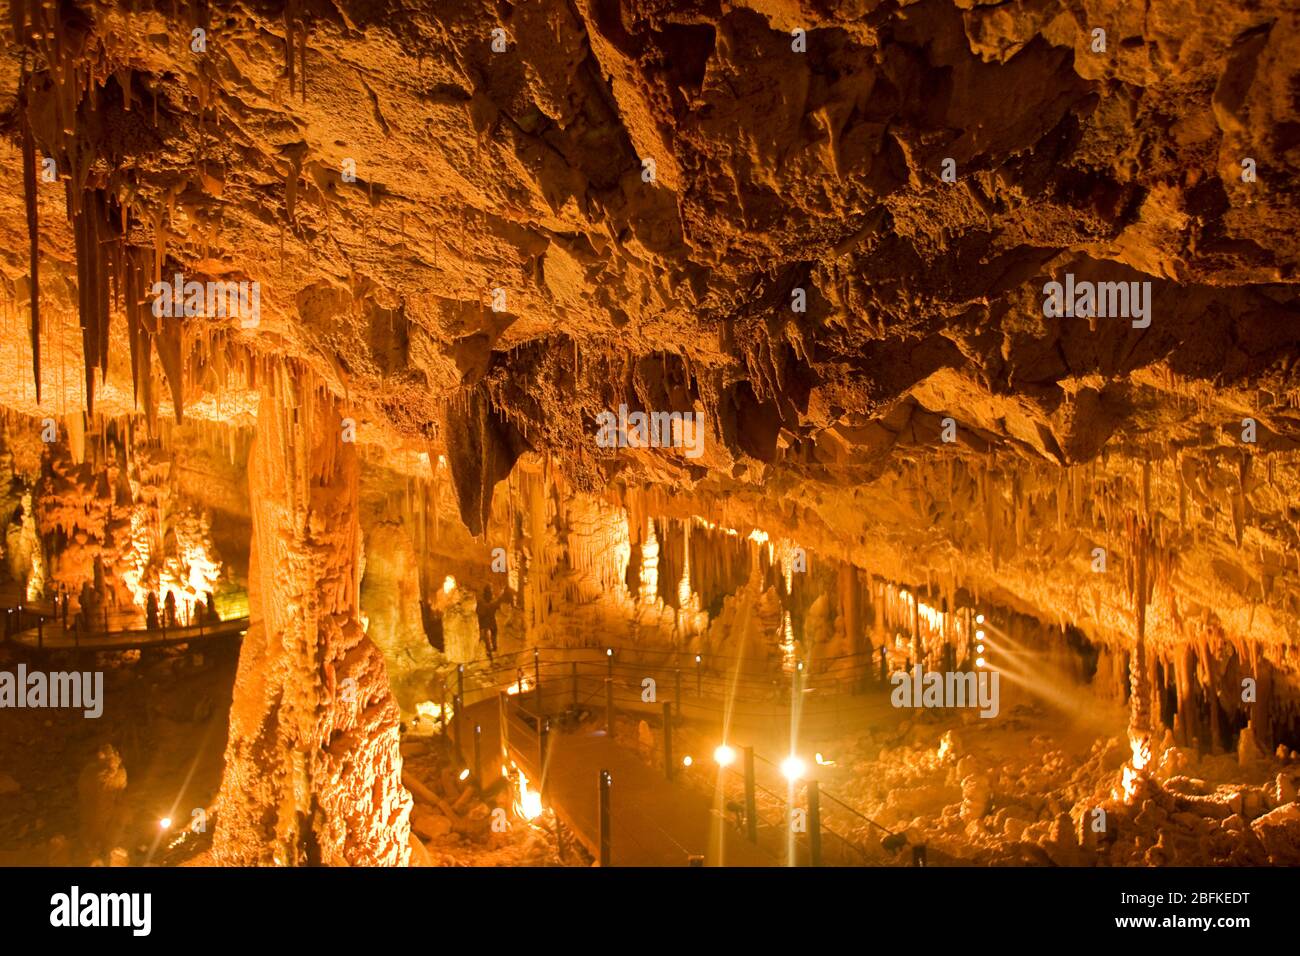 Interior of the Avshalom Stalactite Cave Nature Reserve (also called Soreq Cave) Jerusalem Mountains, Israel This cave is 82-meter-long, 60-meter-wide Stock Photo